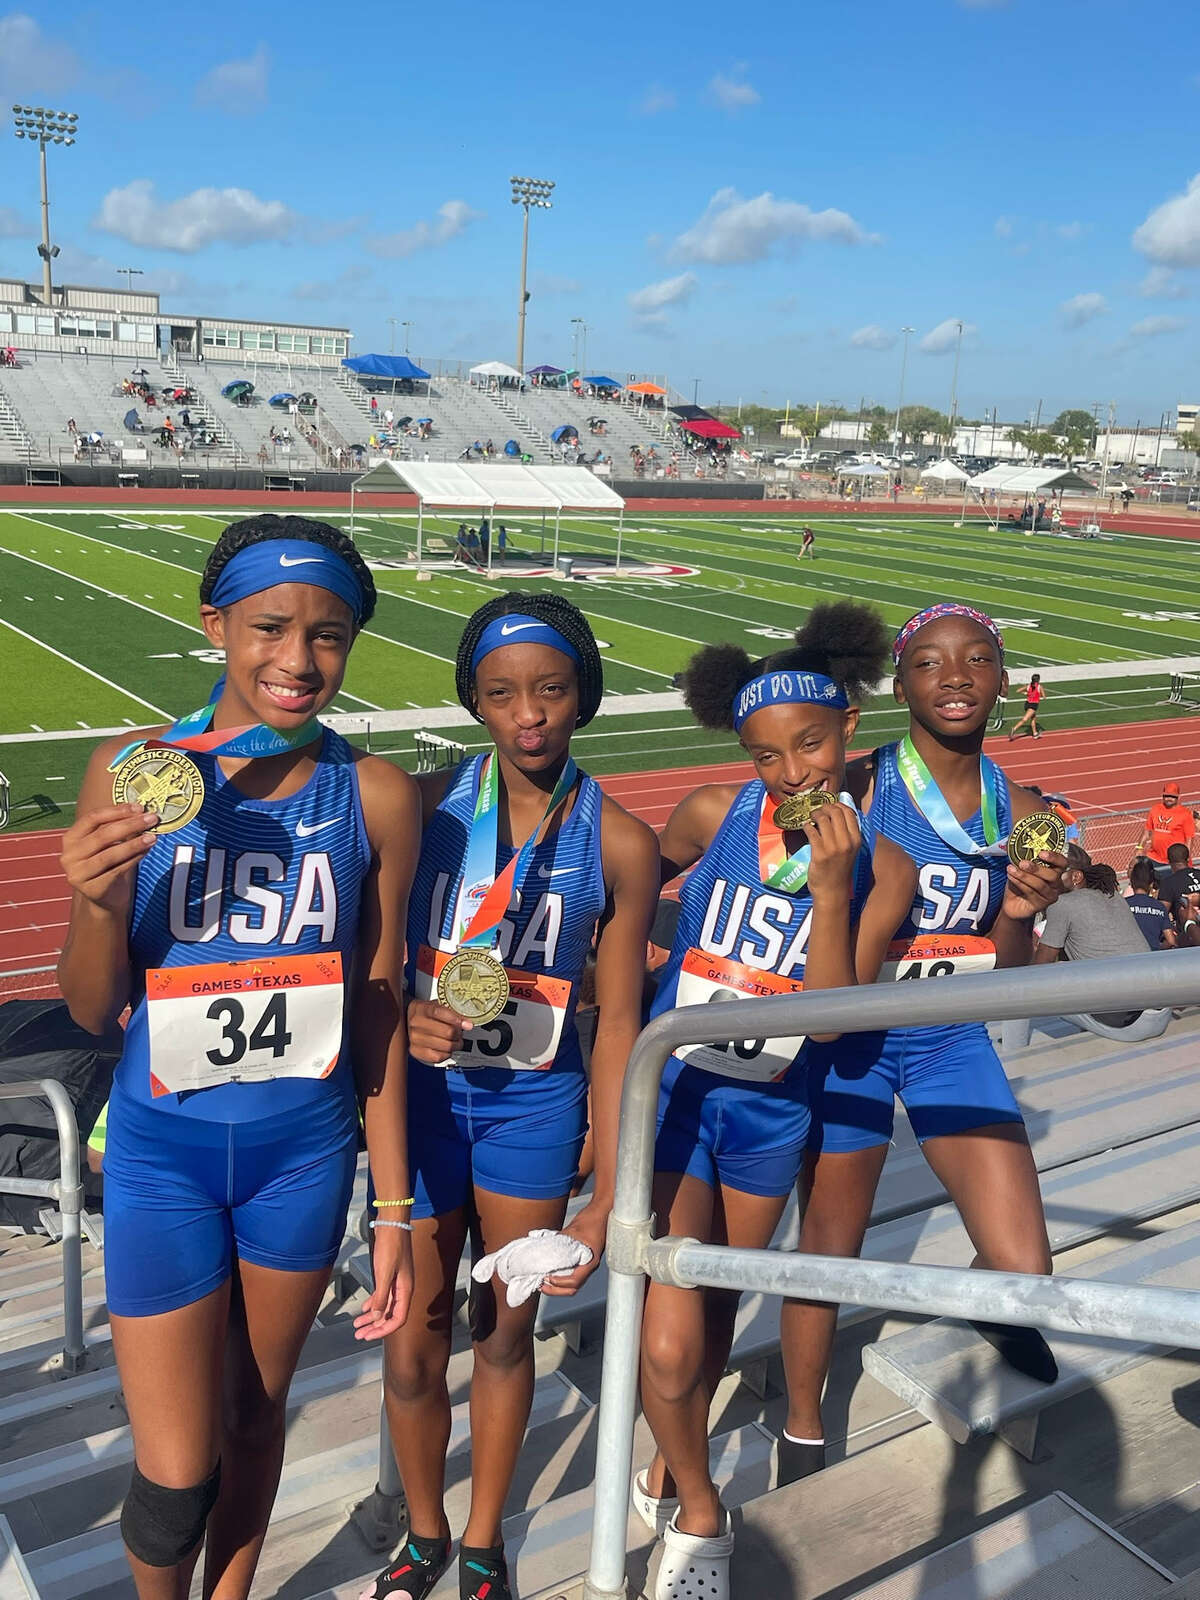 The Beaumont Track Club 12U 4x100 relay team, Shalynn Guidry, Rylan Clark, Jameson Broxton and Jacie Murchison, came in first place (51.65) in the 12U division of the Texas Amateur Athletic Federation Track and Field championships on July 24, in Corpus Christi.